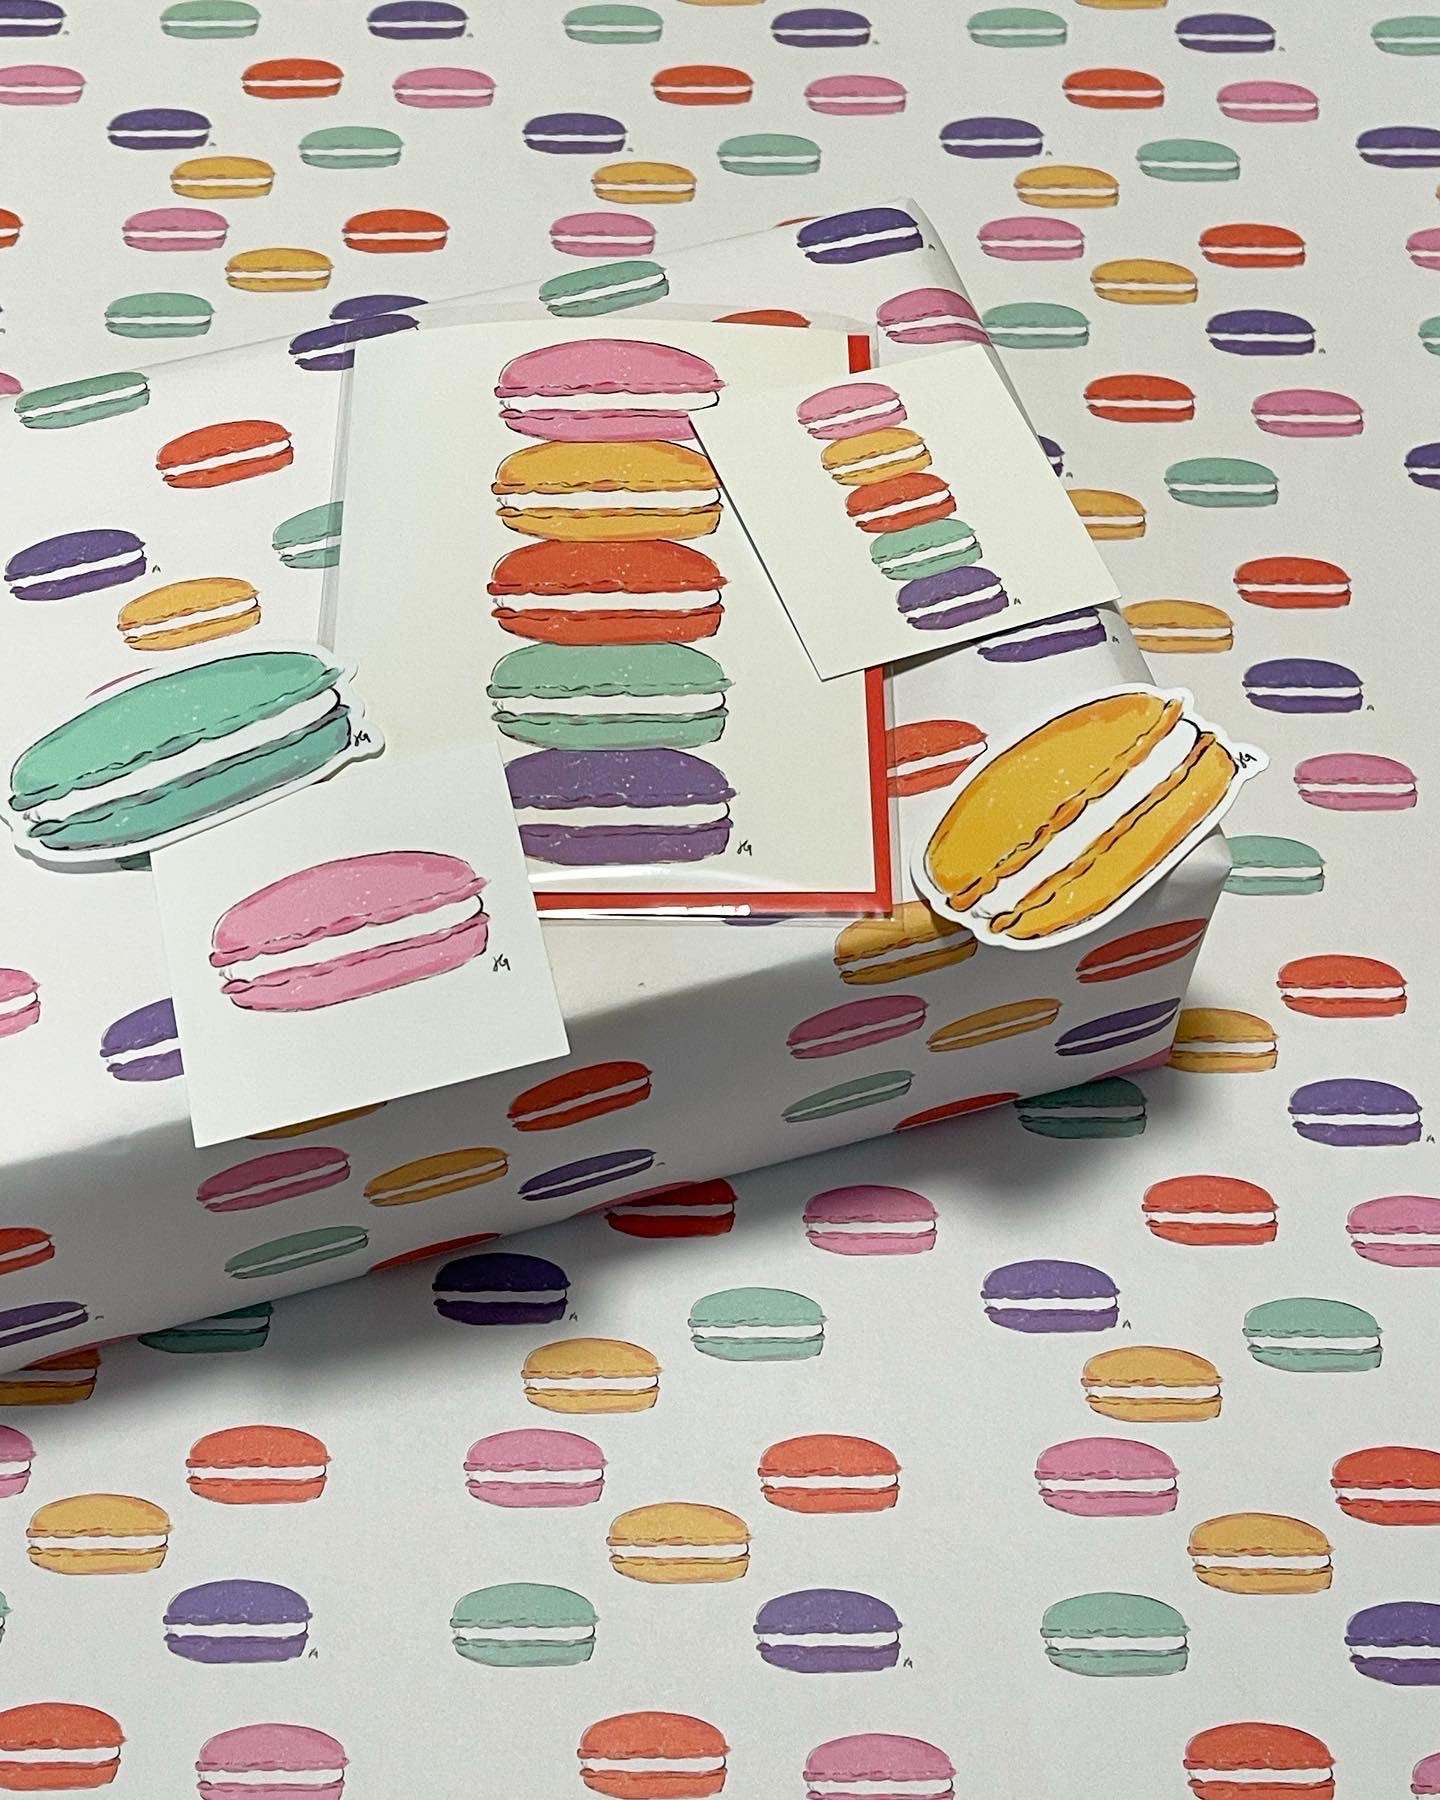 Macaron Wrapping Paper Sheets (4 pieces)